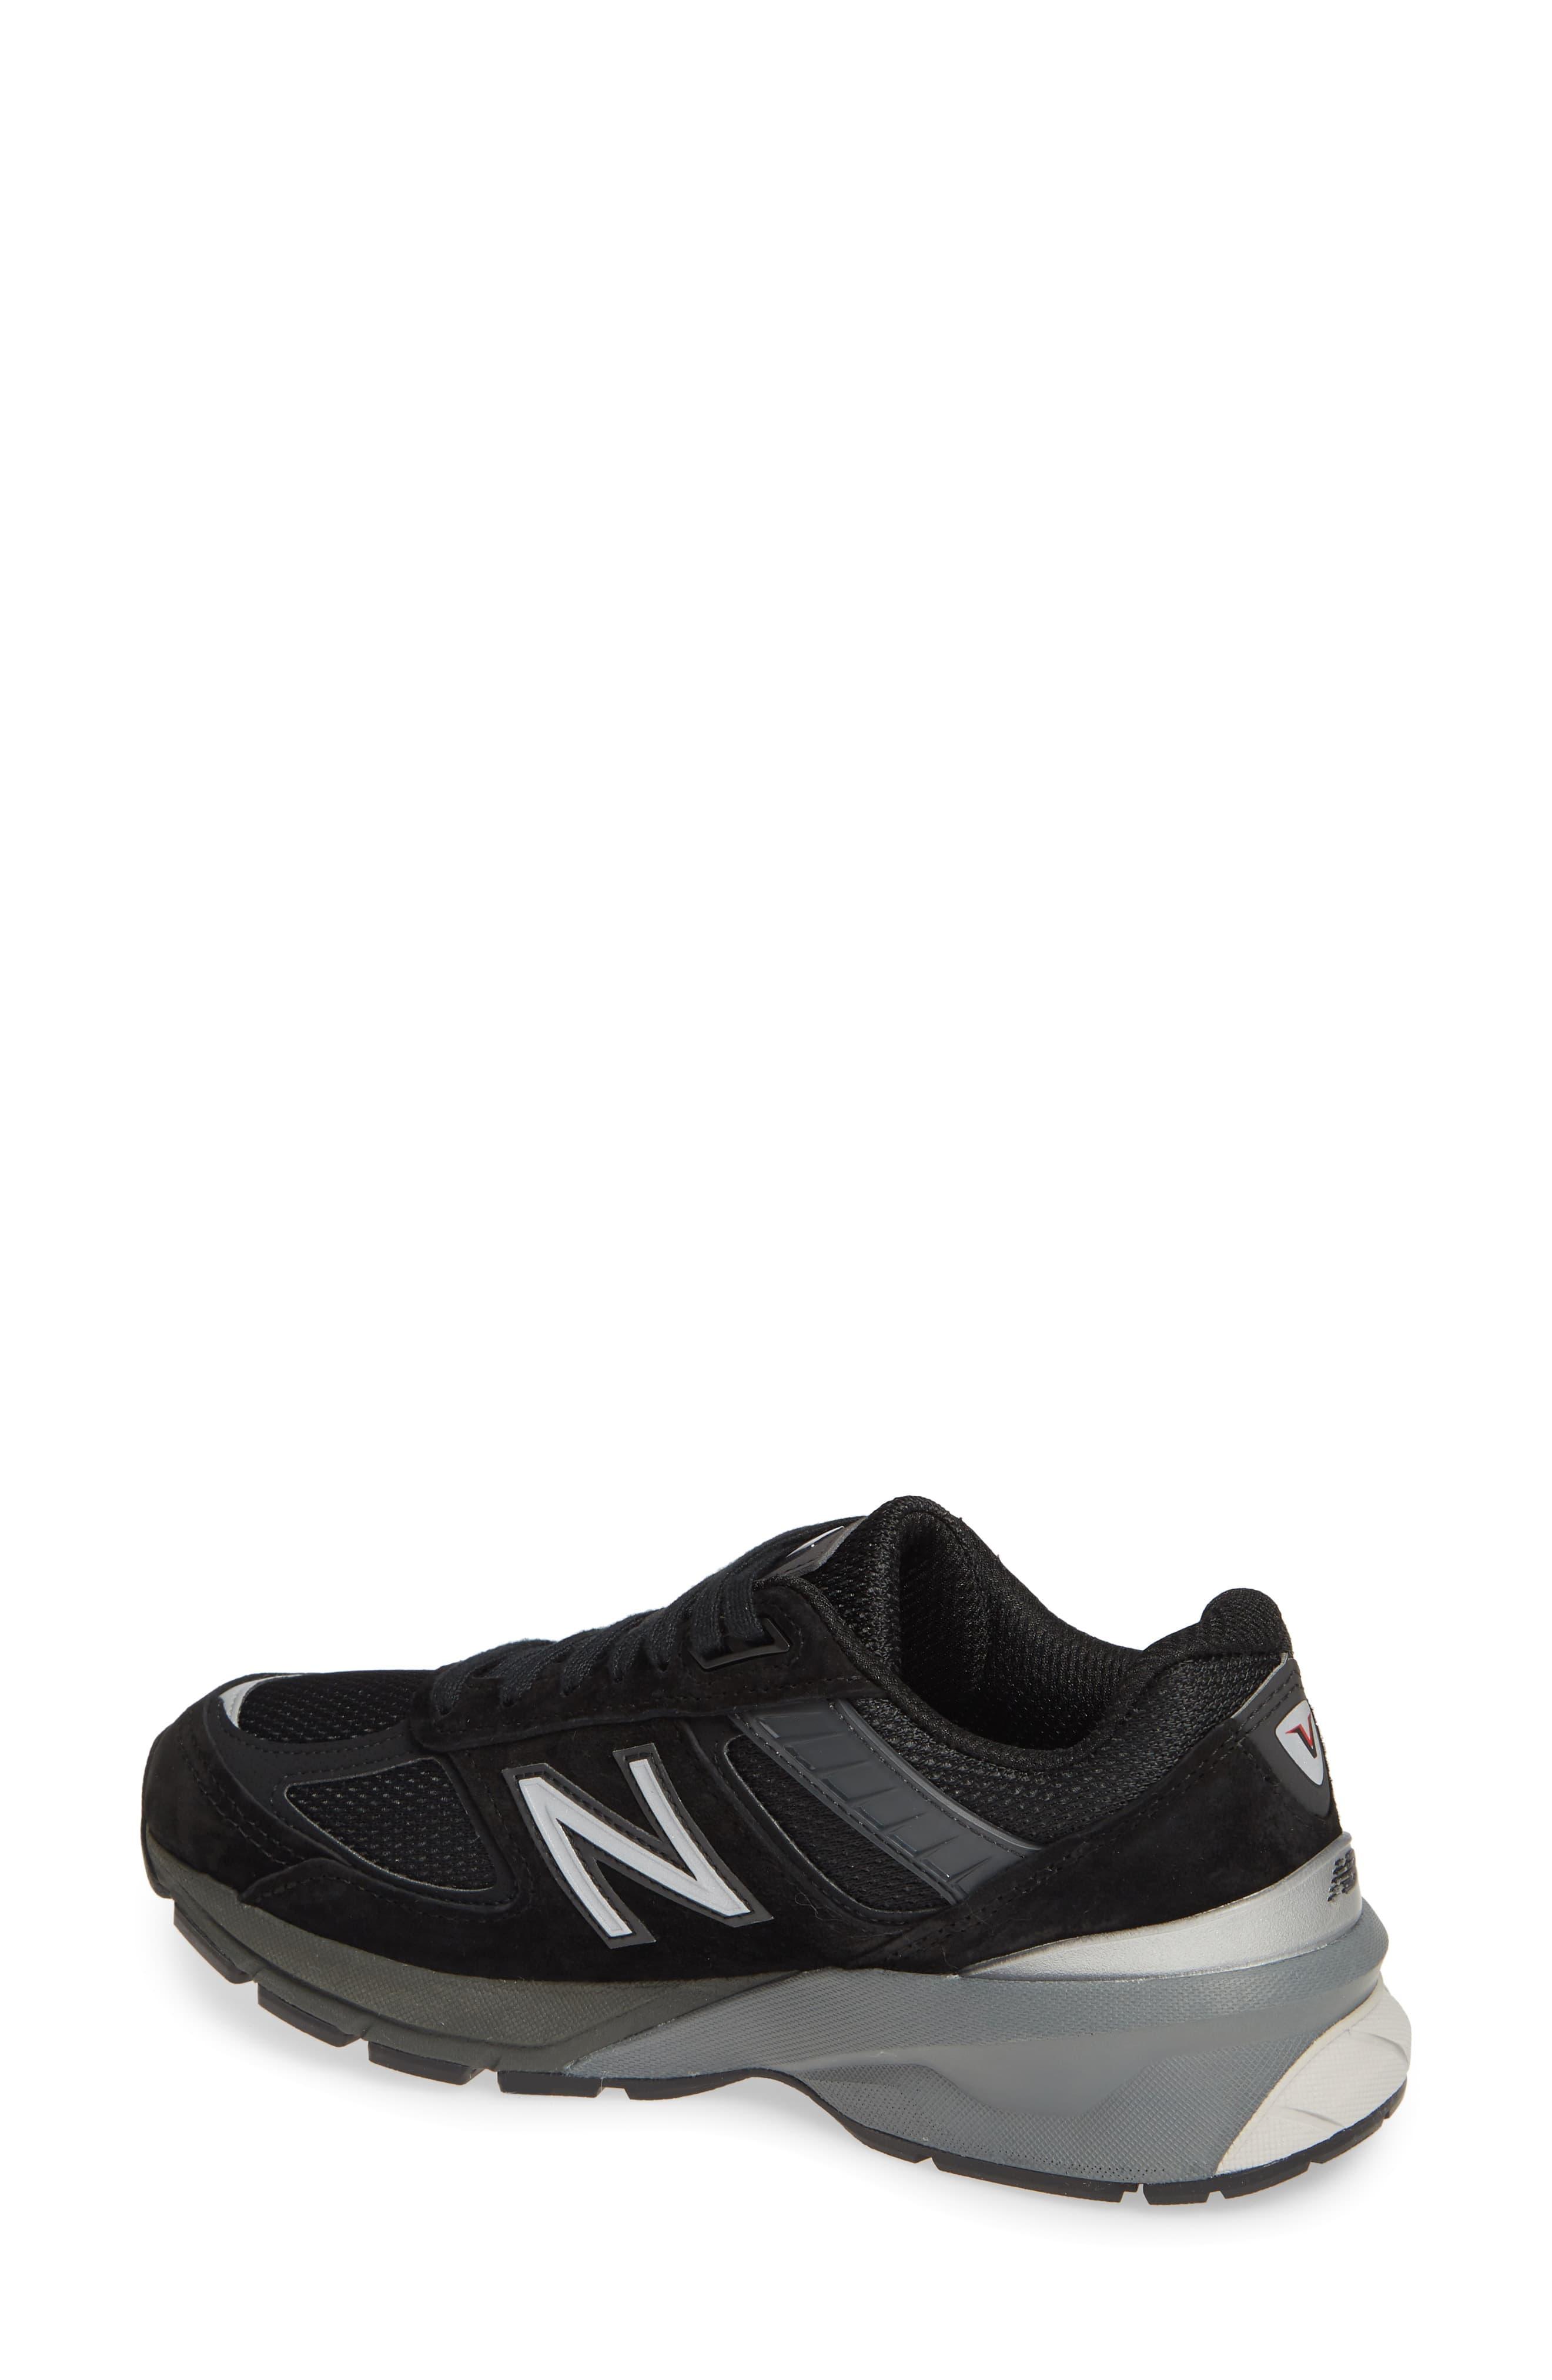 New Balance Suede 990v5 Sneaker in Black - Lyst